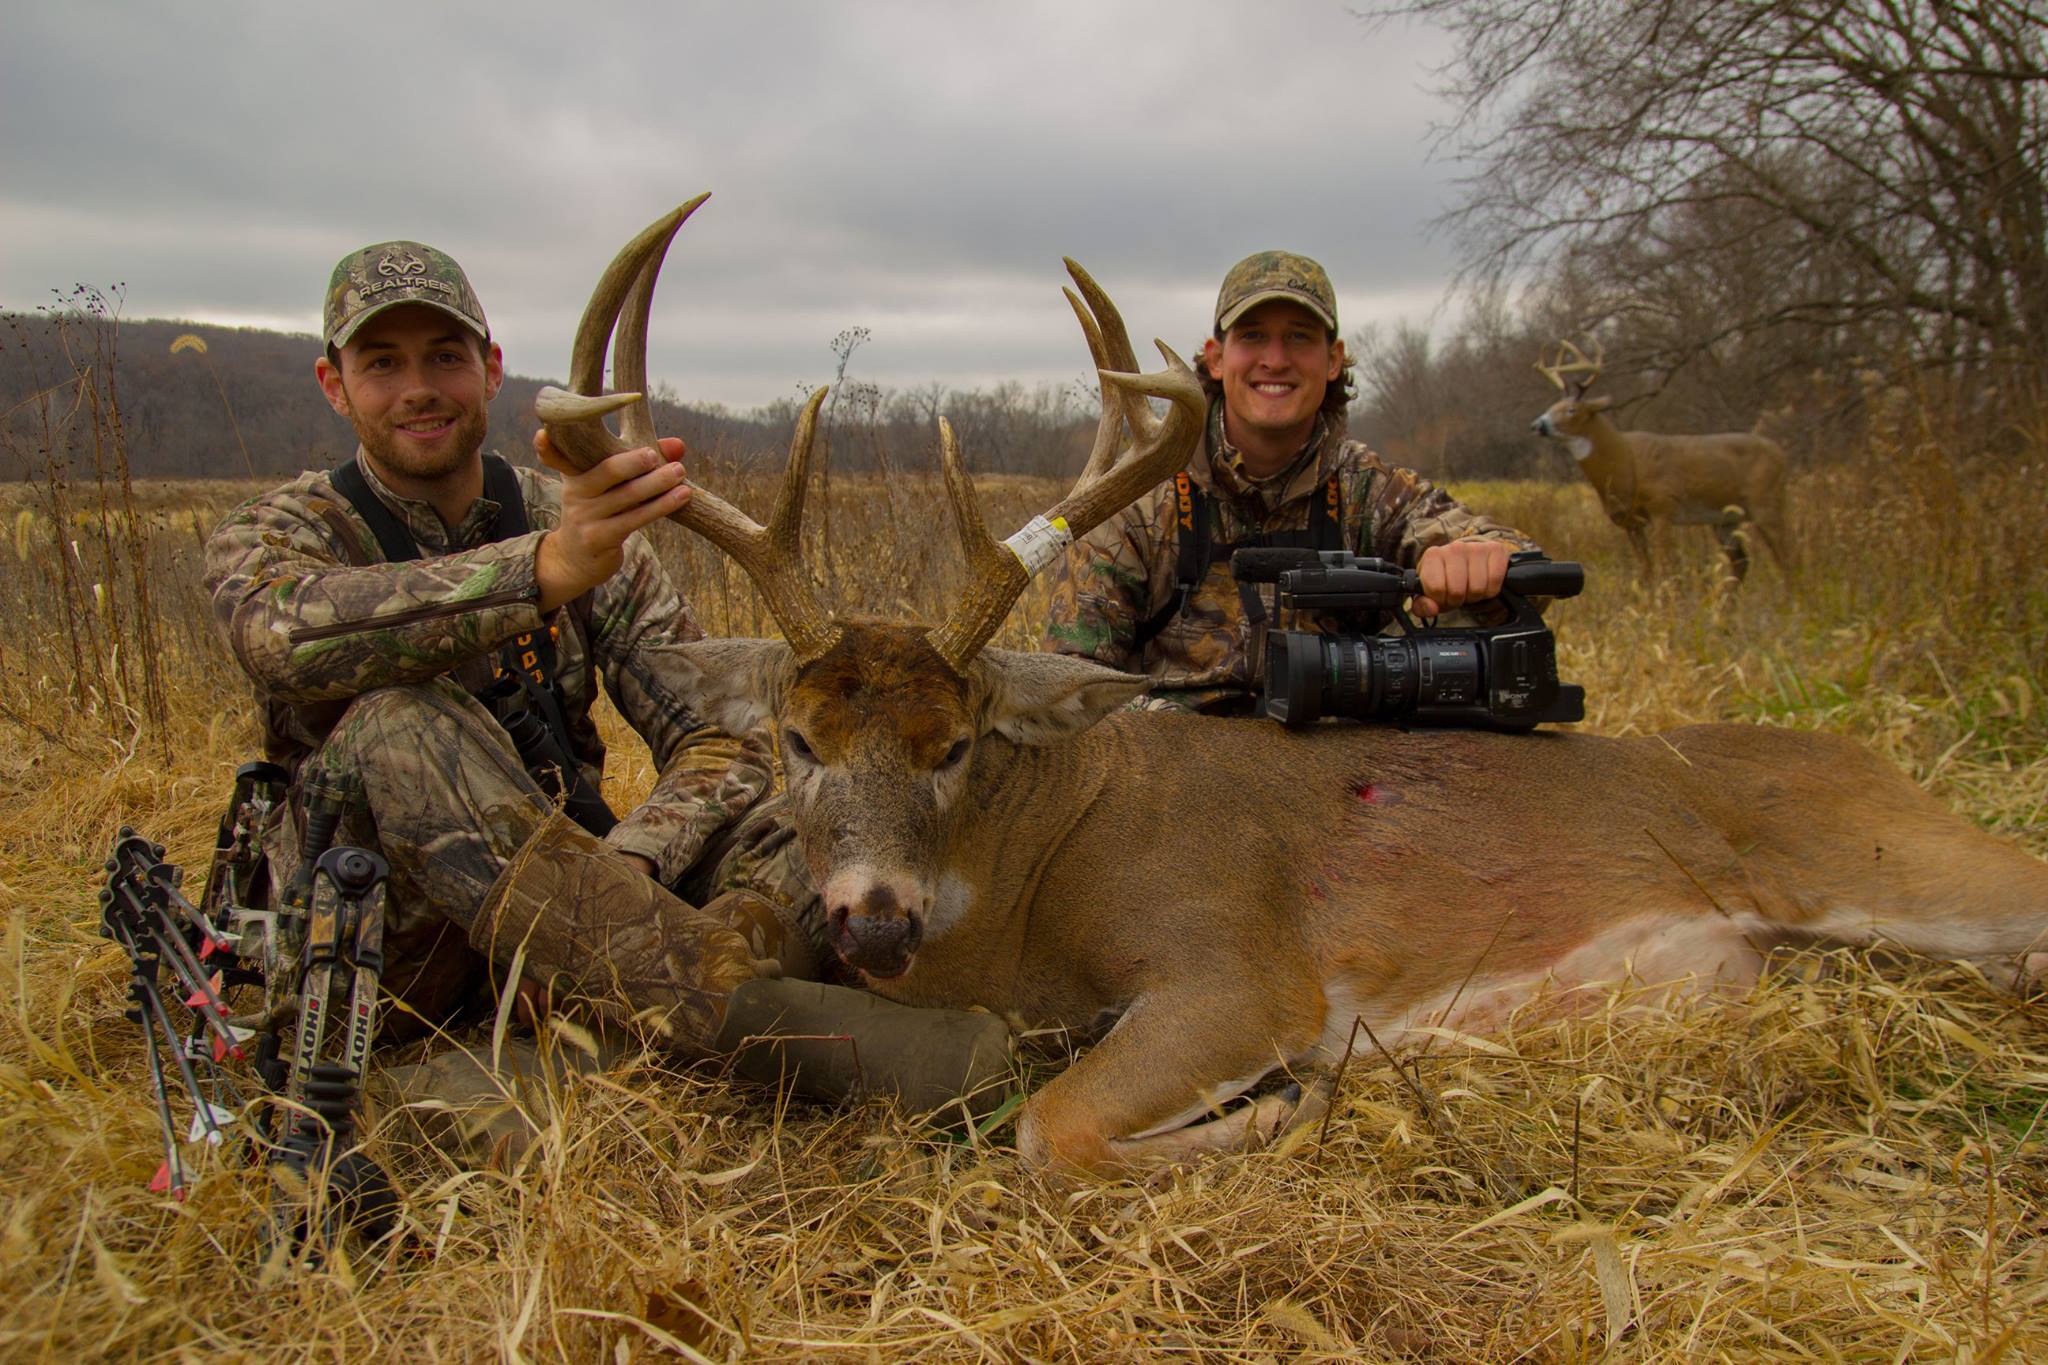 Hunters pose for a picture after taking a big buck on iowa public land